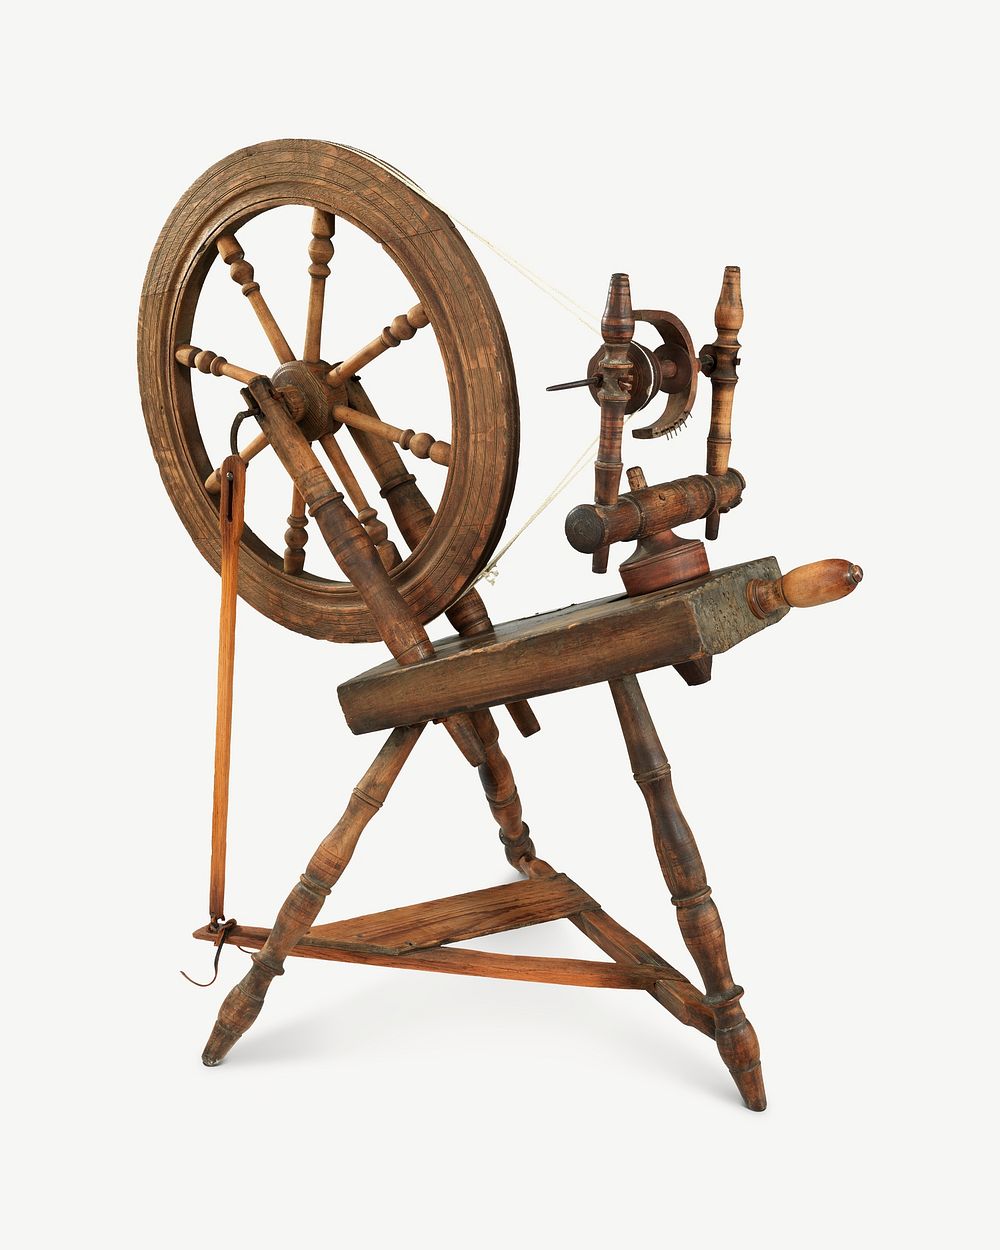 Vintage spinning wheel psd. Remixed by rawpixel.